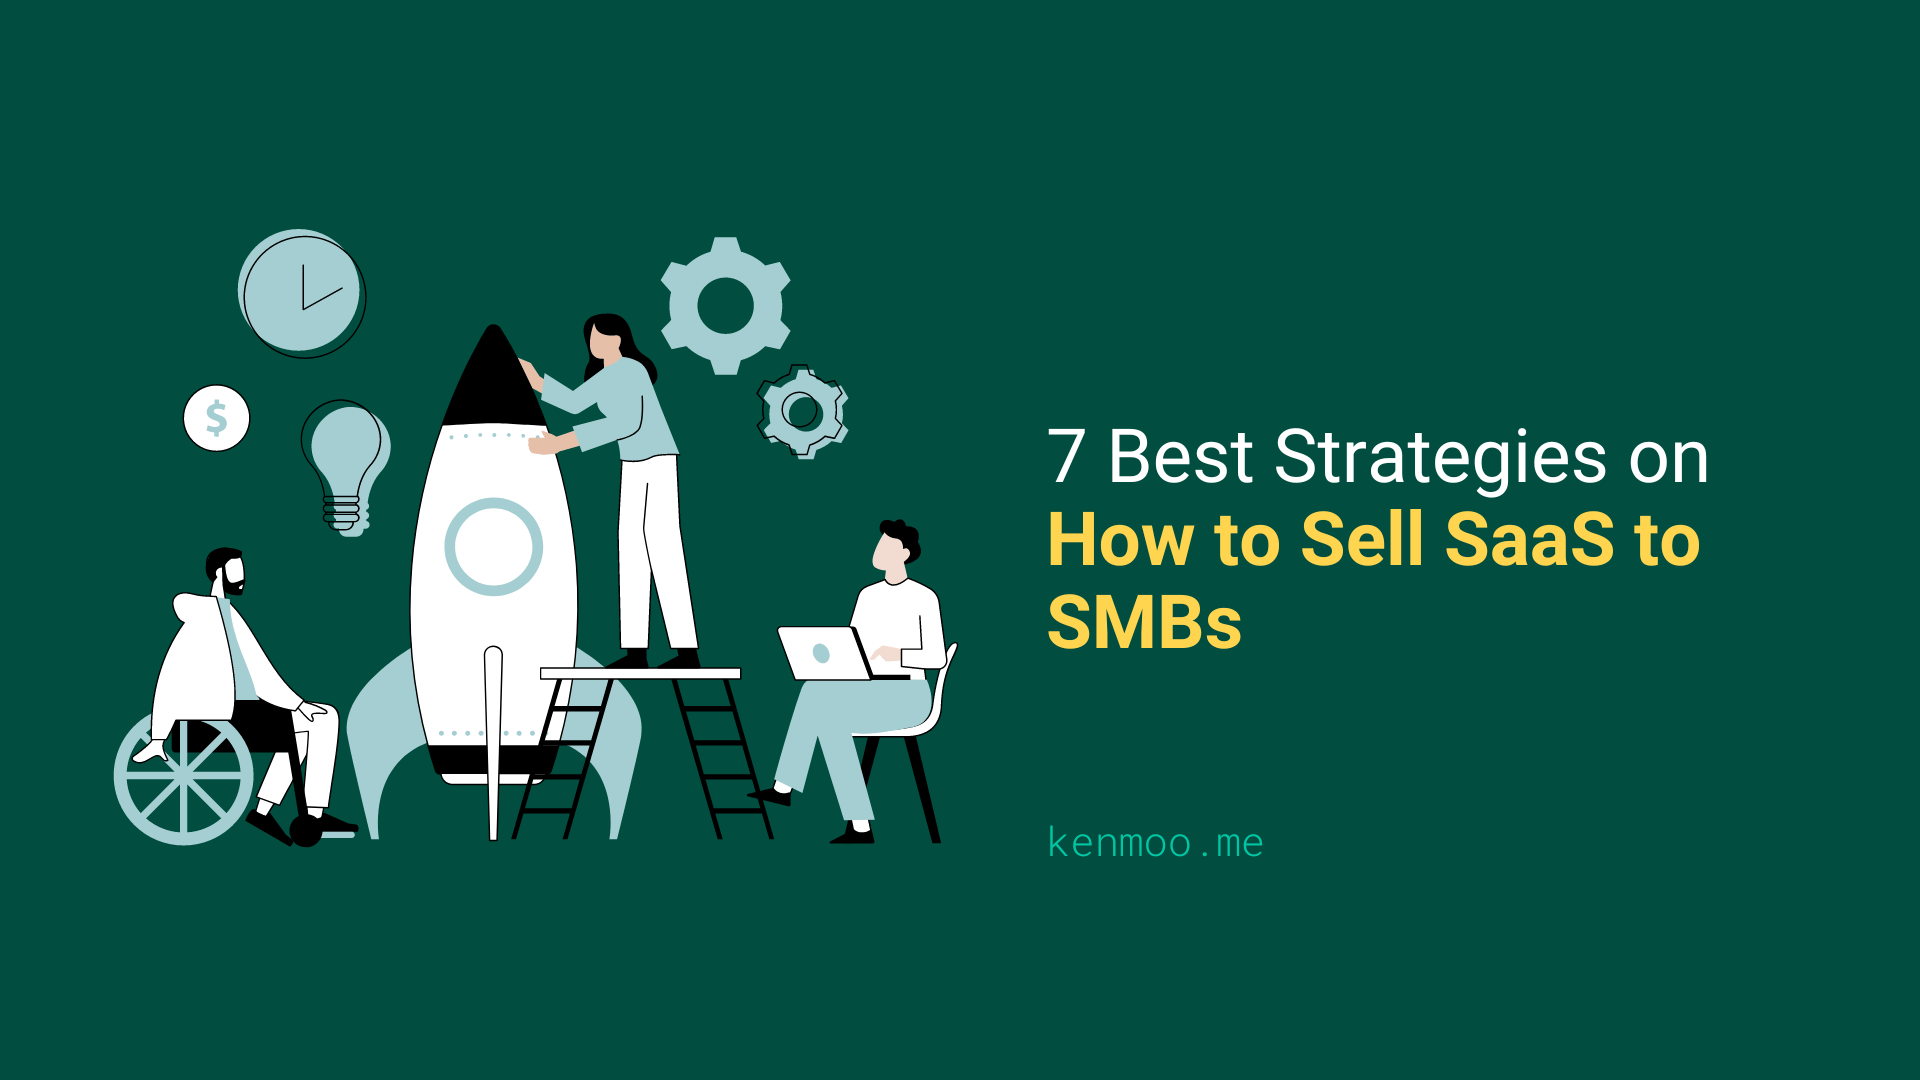 7 Best Strategies on How to Sell SaaS to SMBs